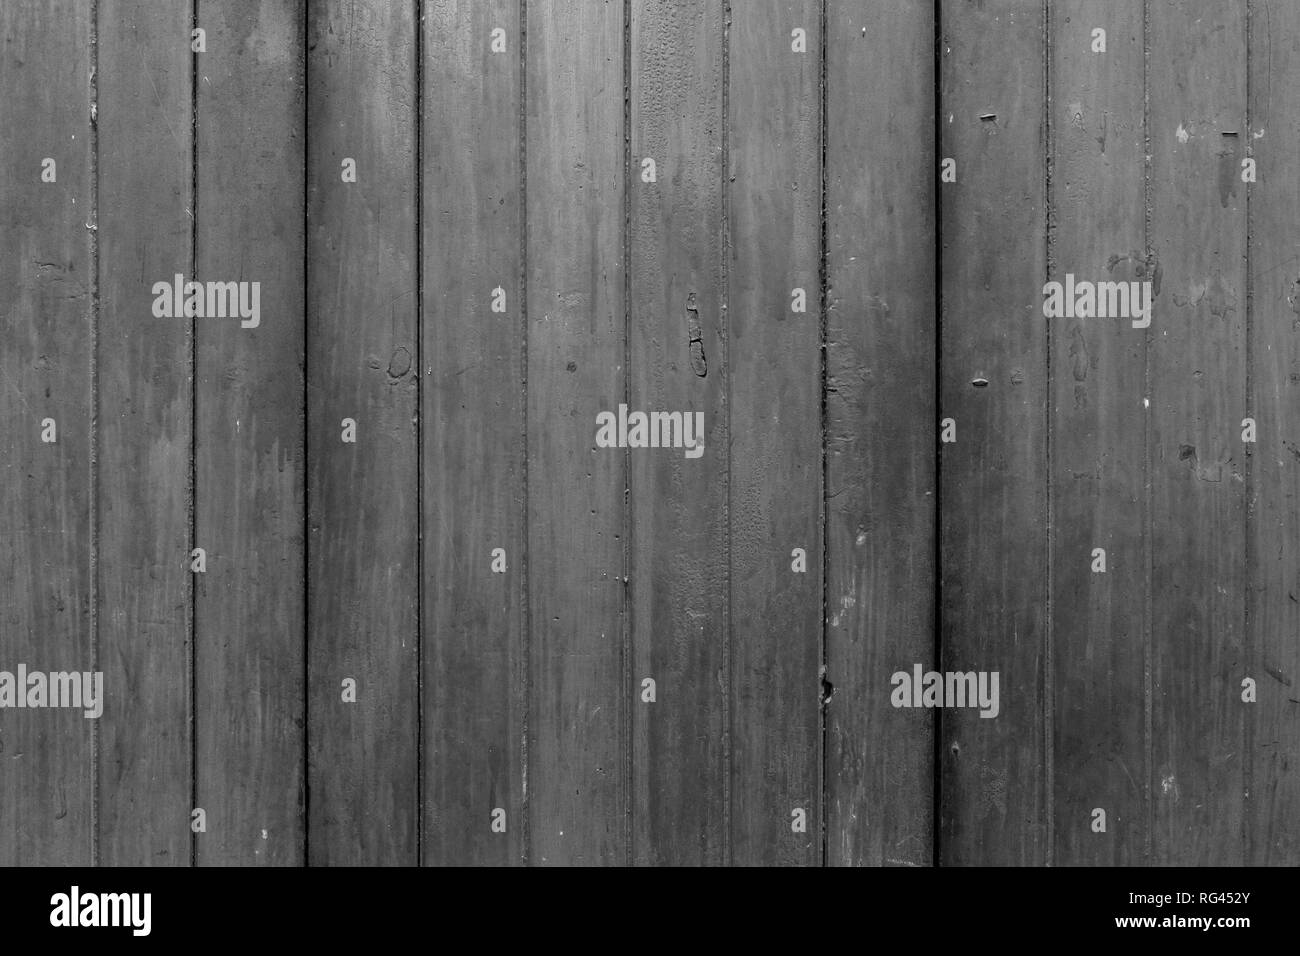 Full frame background of an old, faded and dirty wood board wall in black and white. Stock Photo